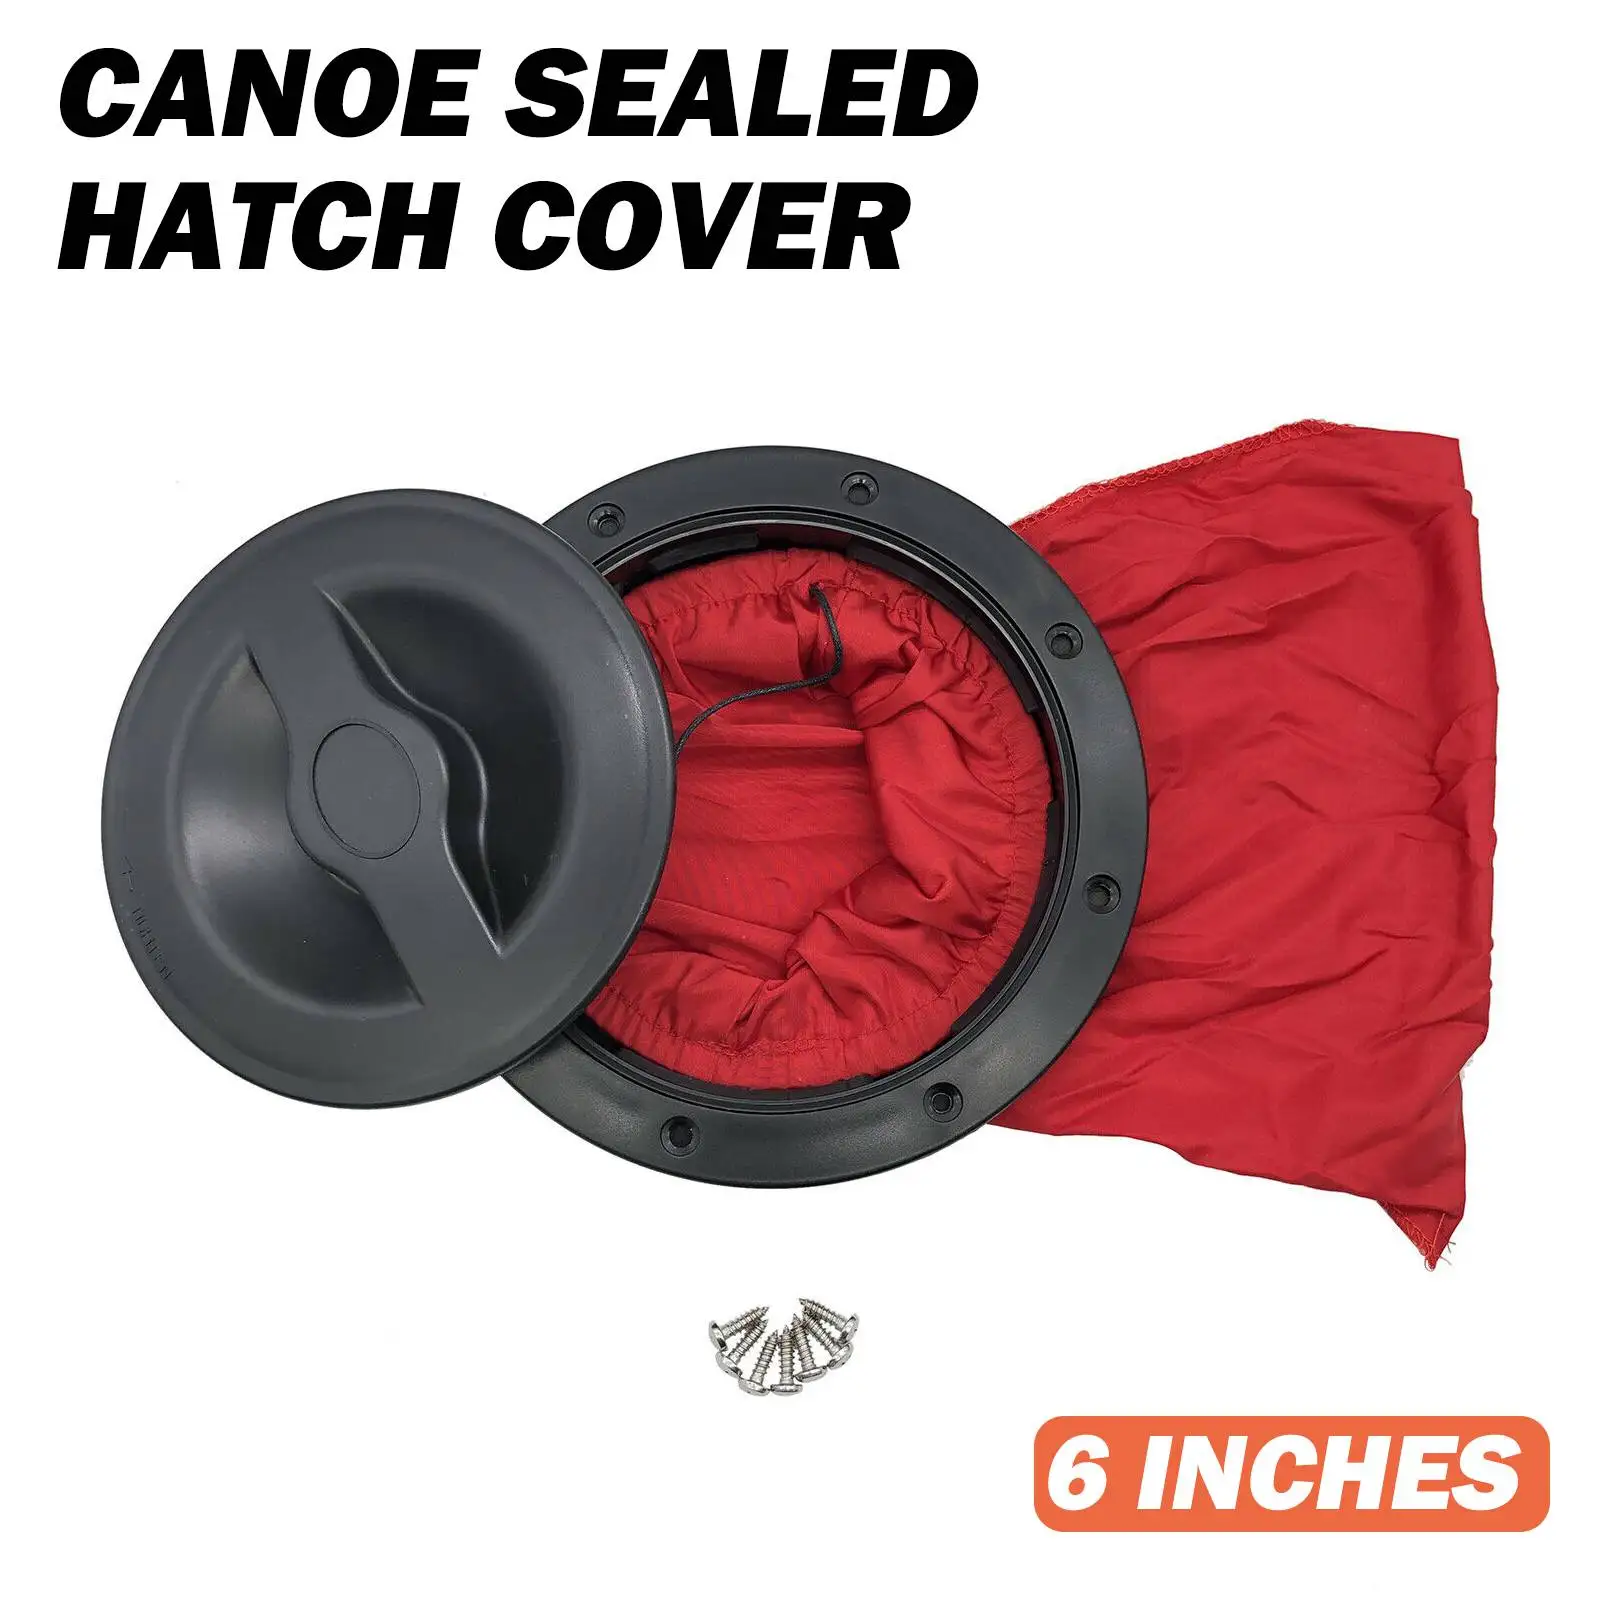 6-inch storage accessories Kayak Black Circular hatchcover Oval seal Cruise boat Red mesh bag